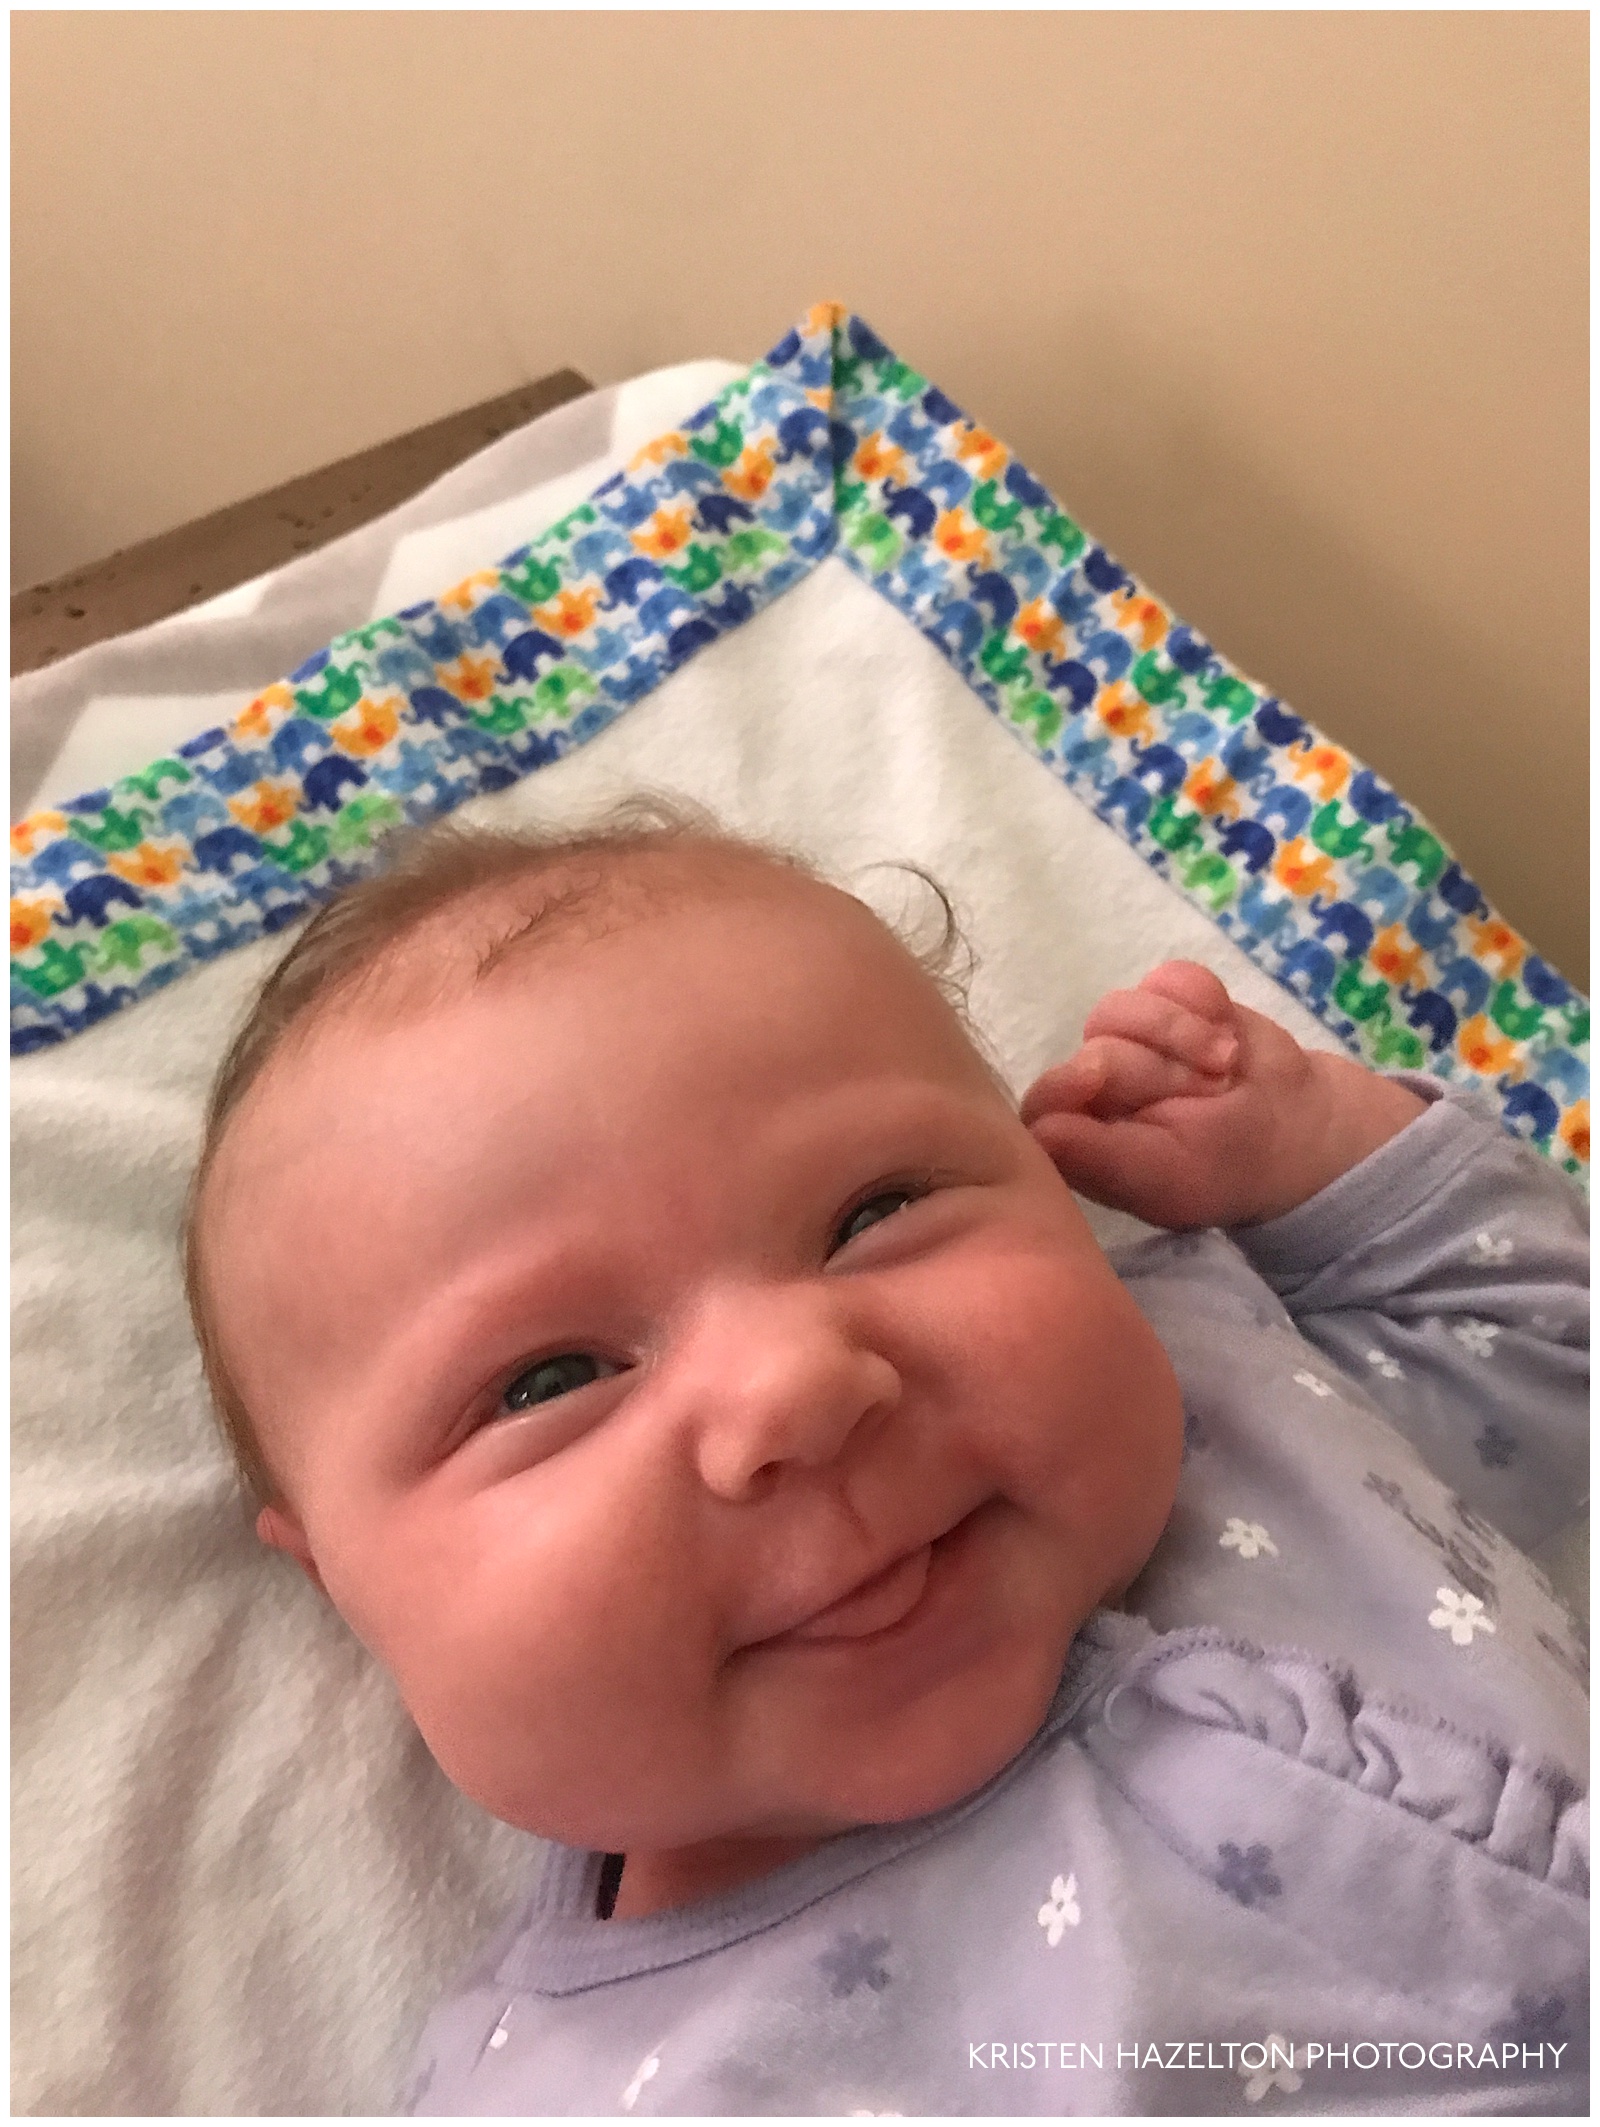 Smiling one month old baby